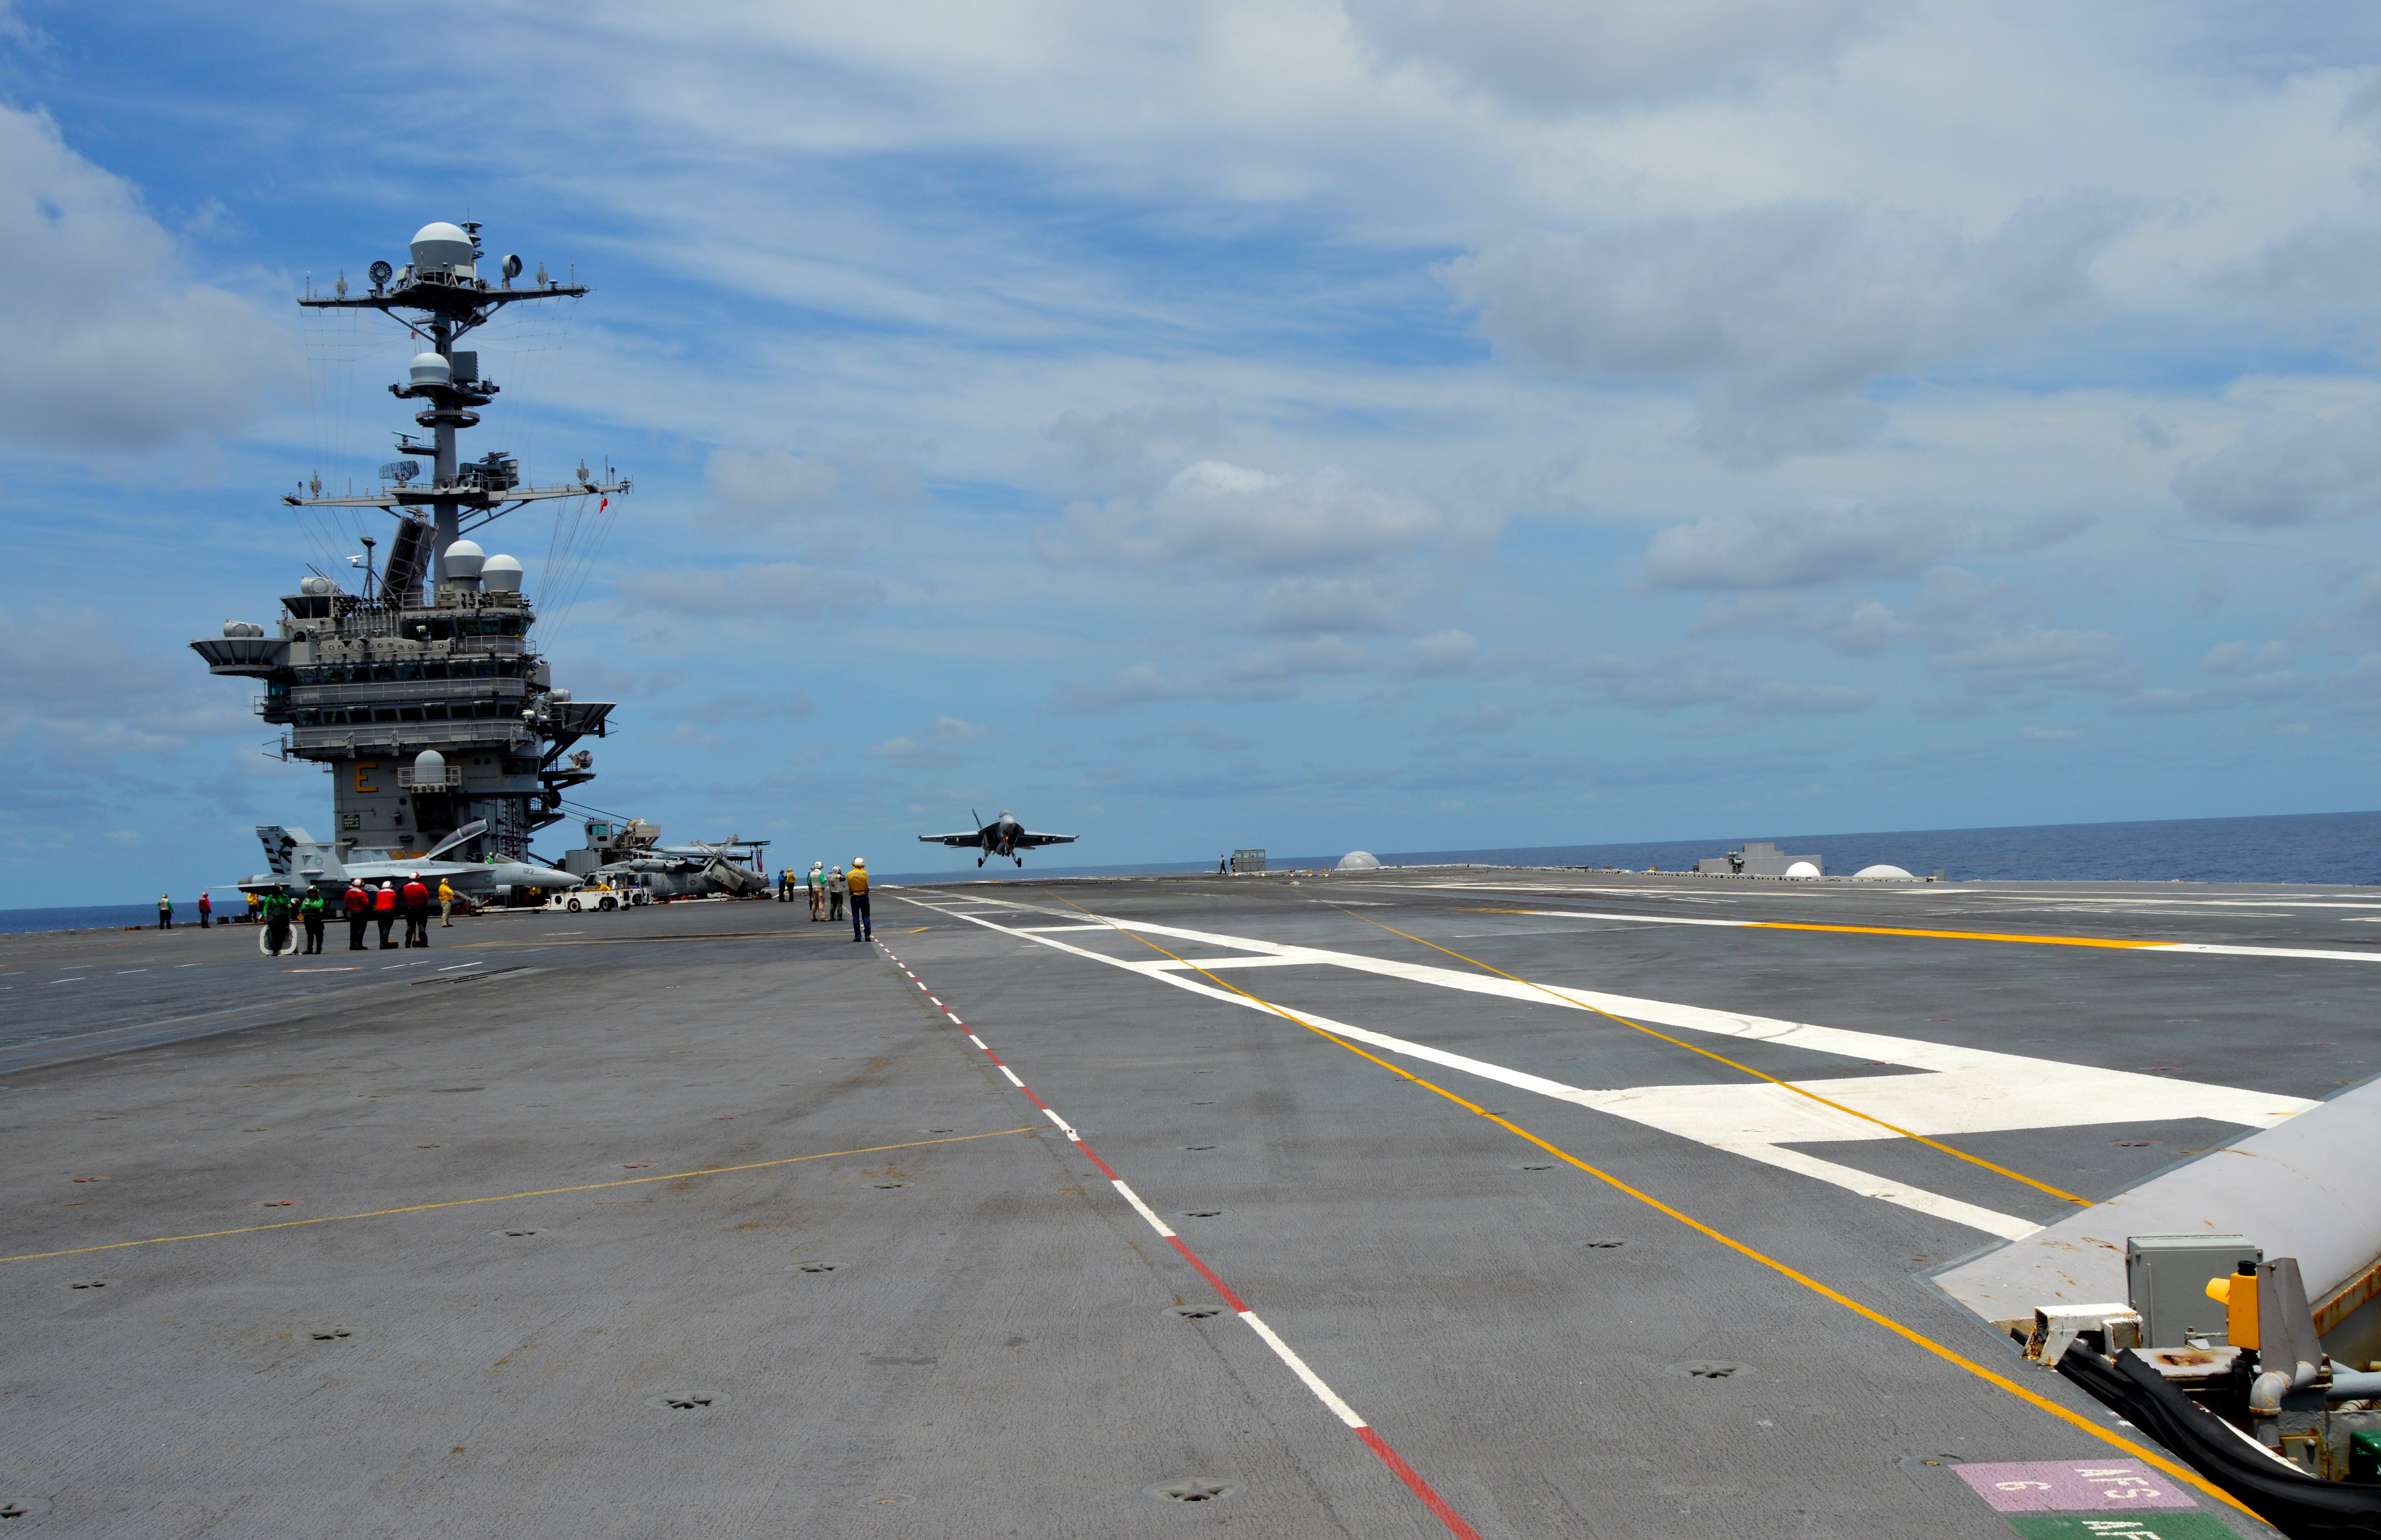 An F/A-18F Super Hornet in Air Test and Evaluation Squadron (VX) 23 conducts touch-and-go flight operations off the deck of USS George Washington (CVN-73) on June 27, 2016, while testing the MAGIC CARPET carrier landing assistance technology. USNI News photo.